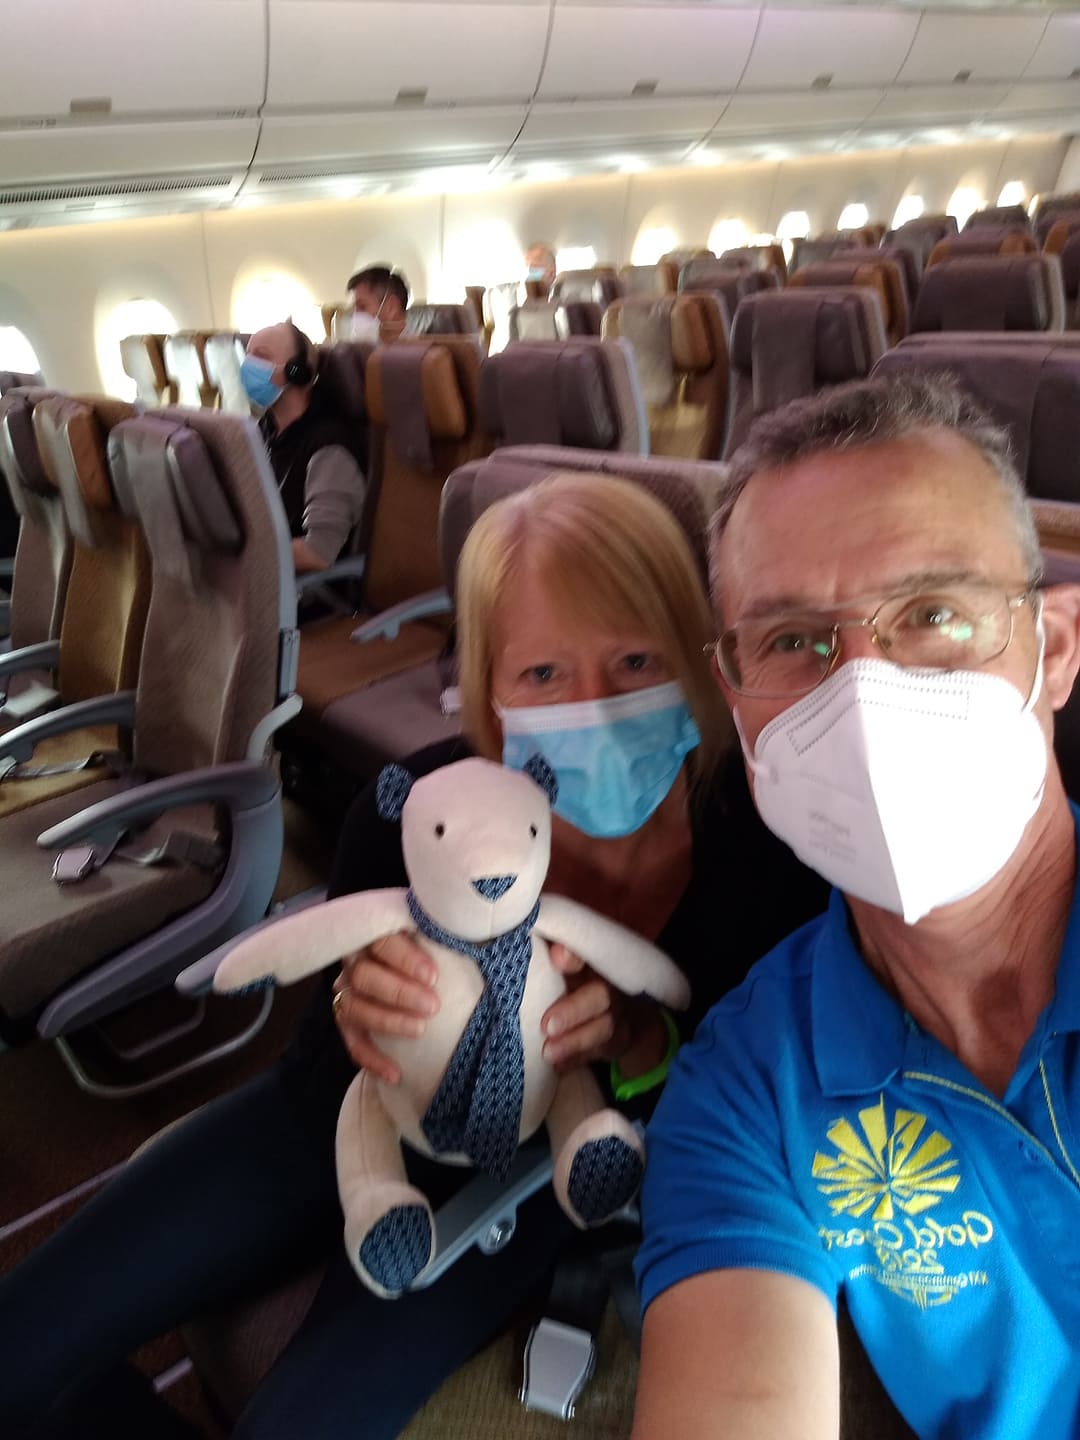 man and woman on plane with a teddy bear